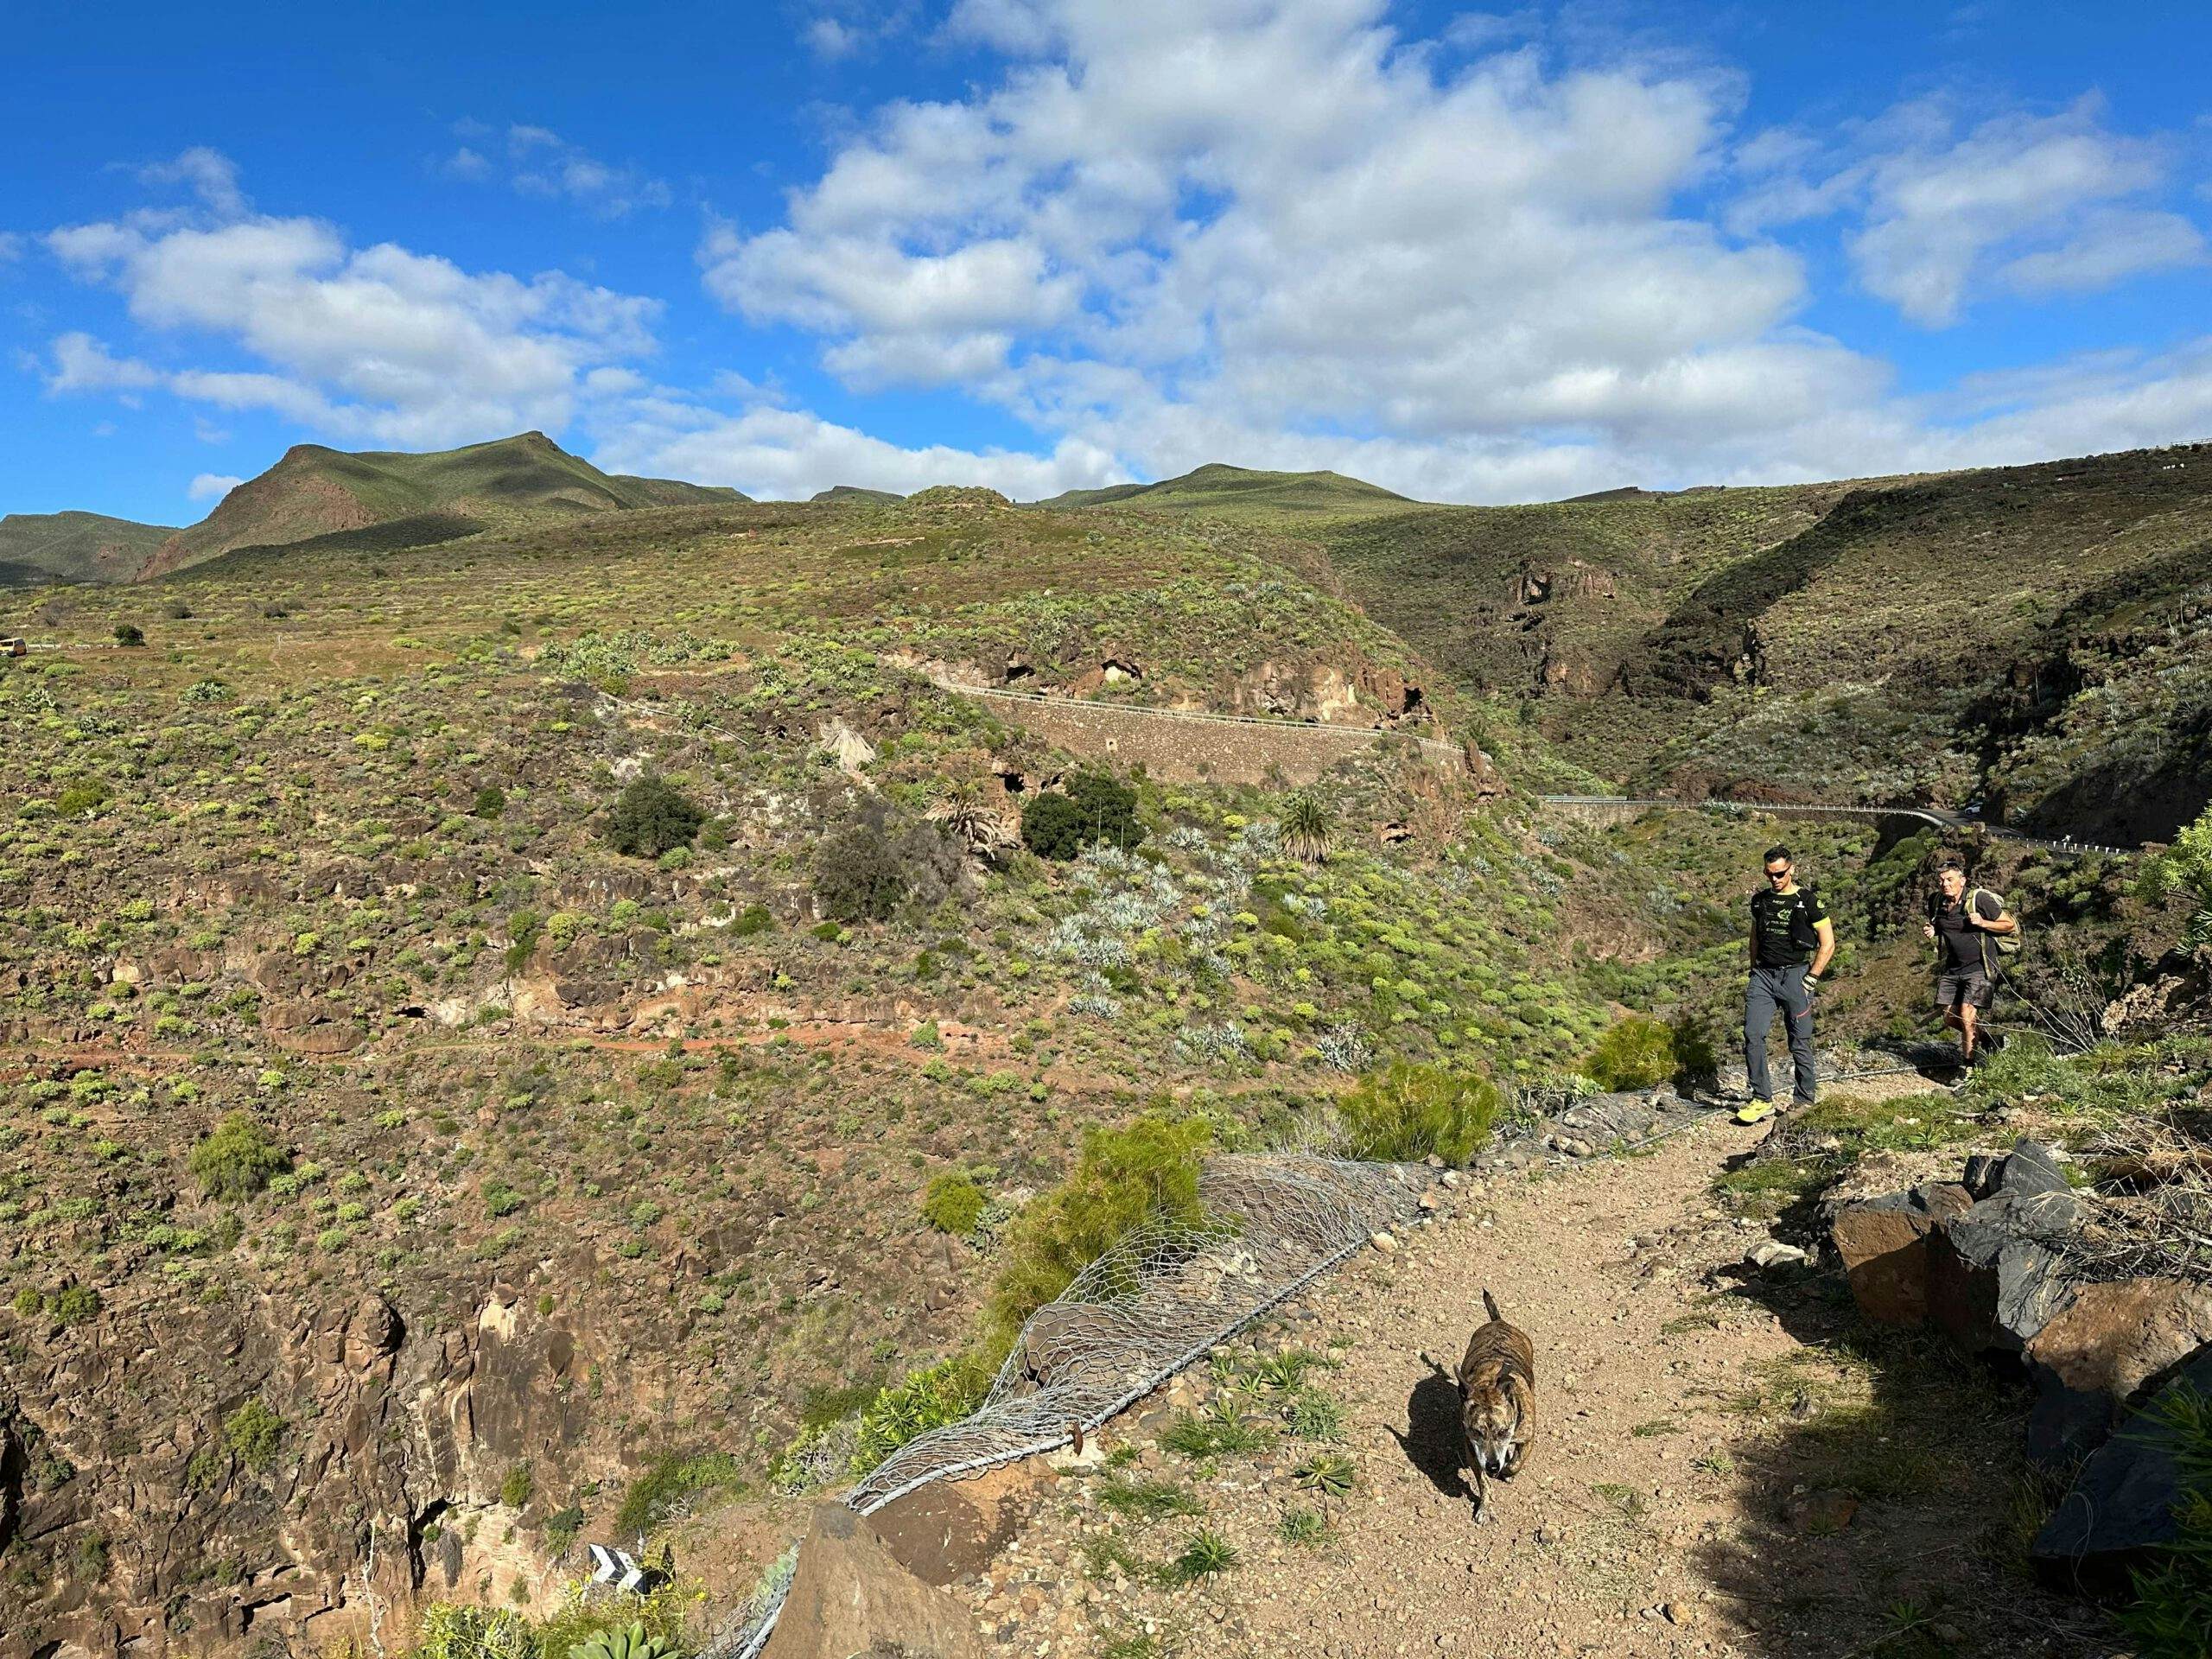 Hikers at the Baranquillo de los Charcos